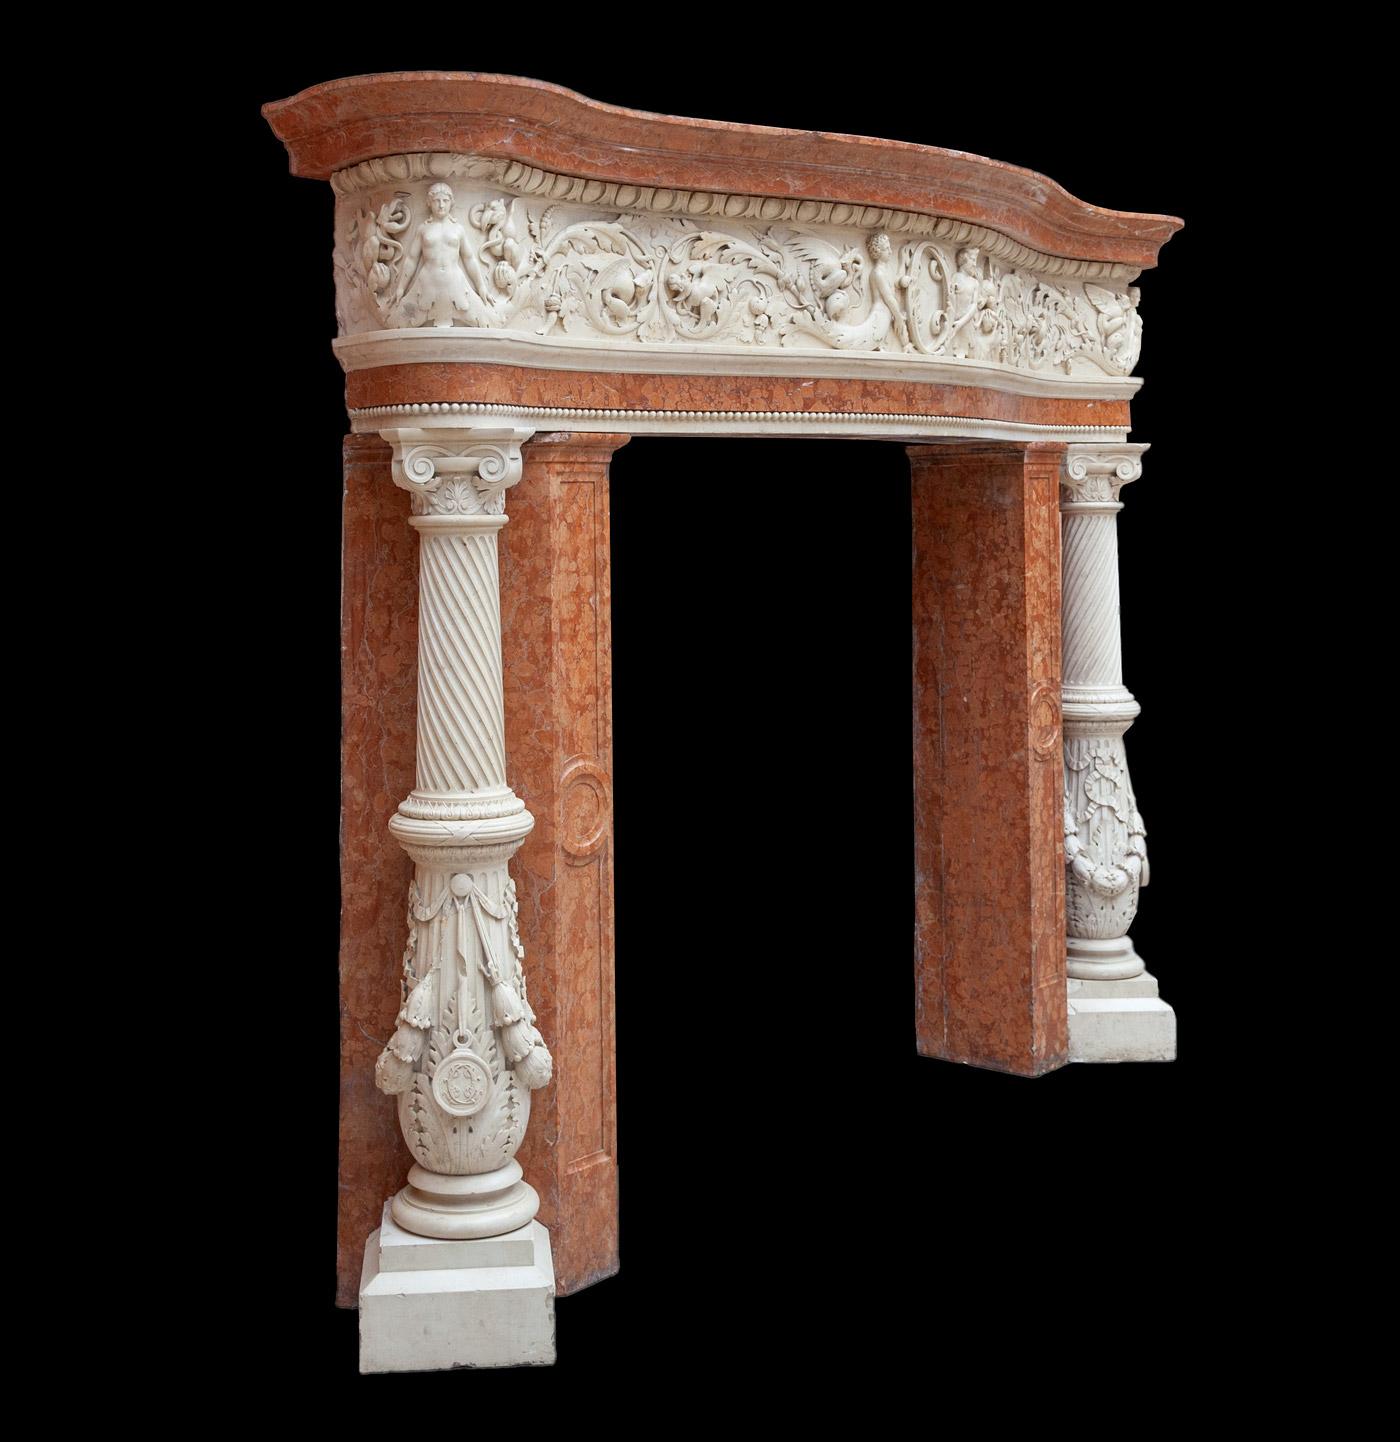 Antique Venetian Renaissance Marble Mantel In Good Condition For Sale In Tyrone, Northern Ireland